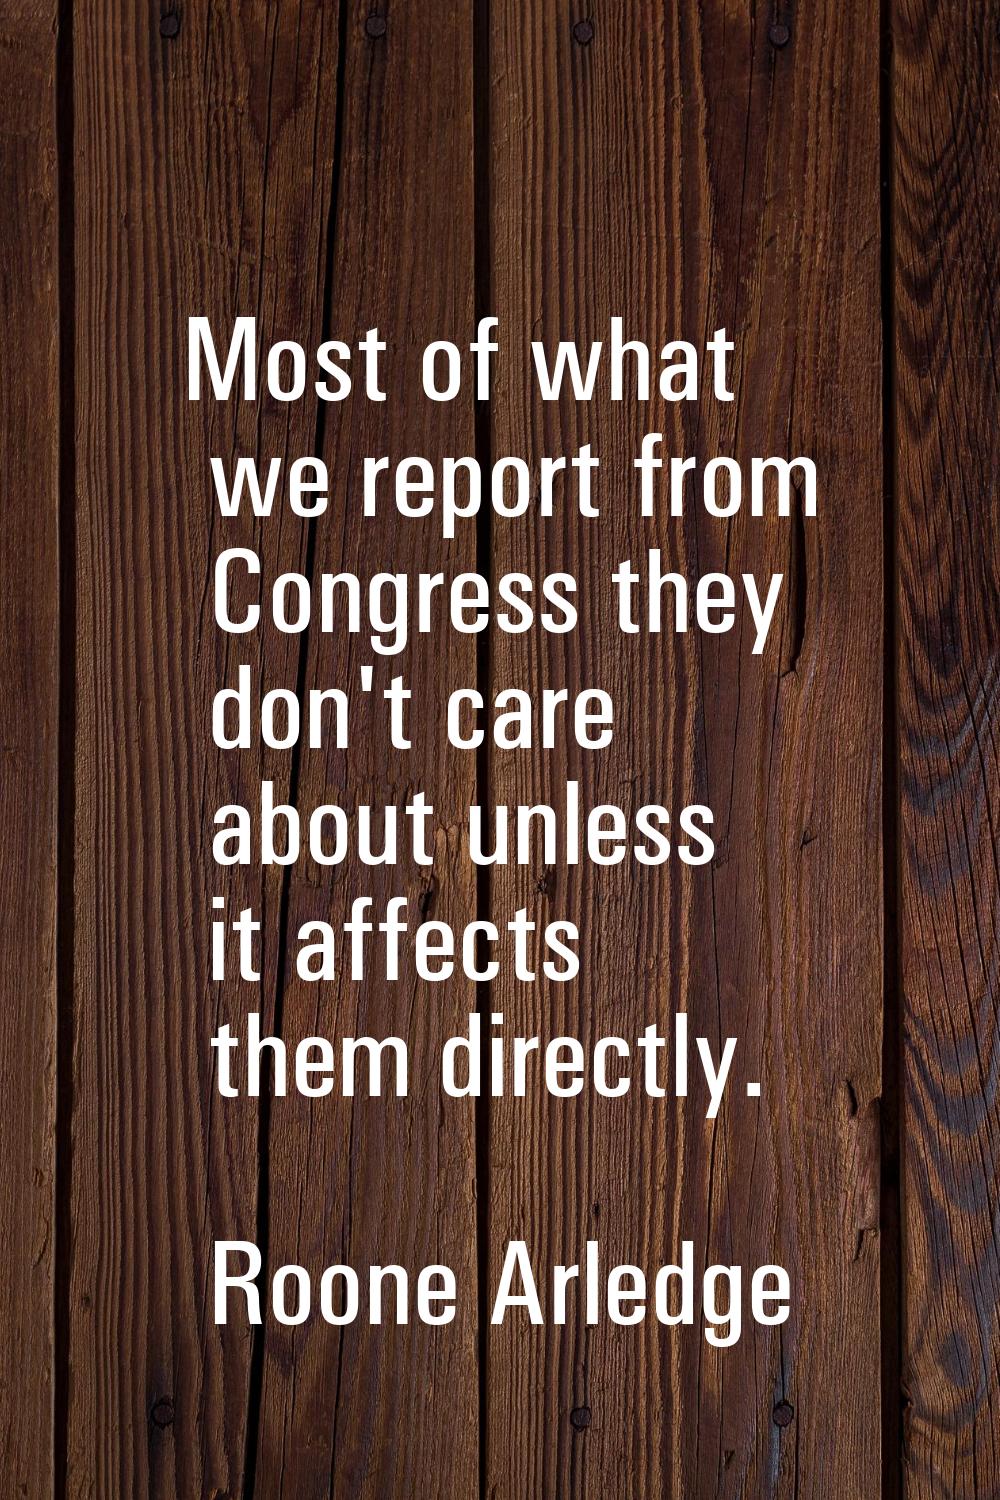 Most of what we report from Congress they don't care about unless it affects them directly.